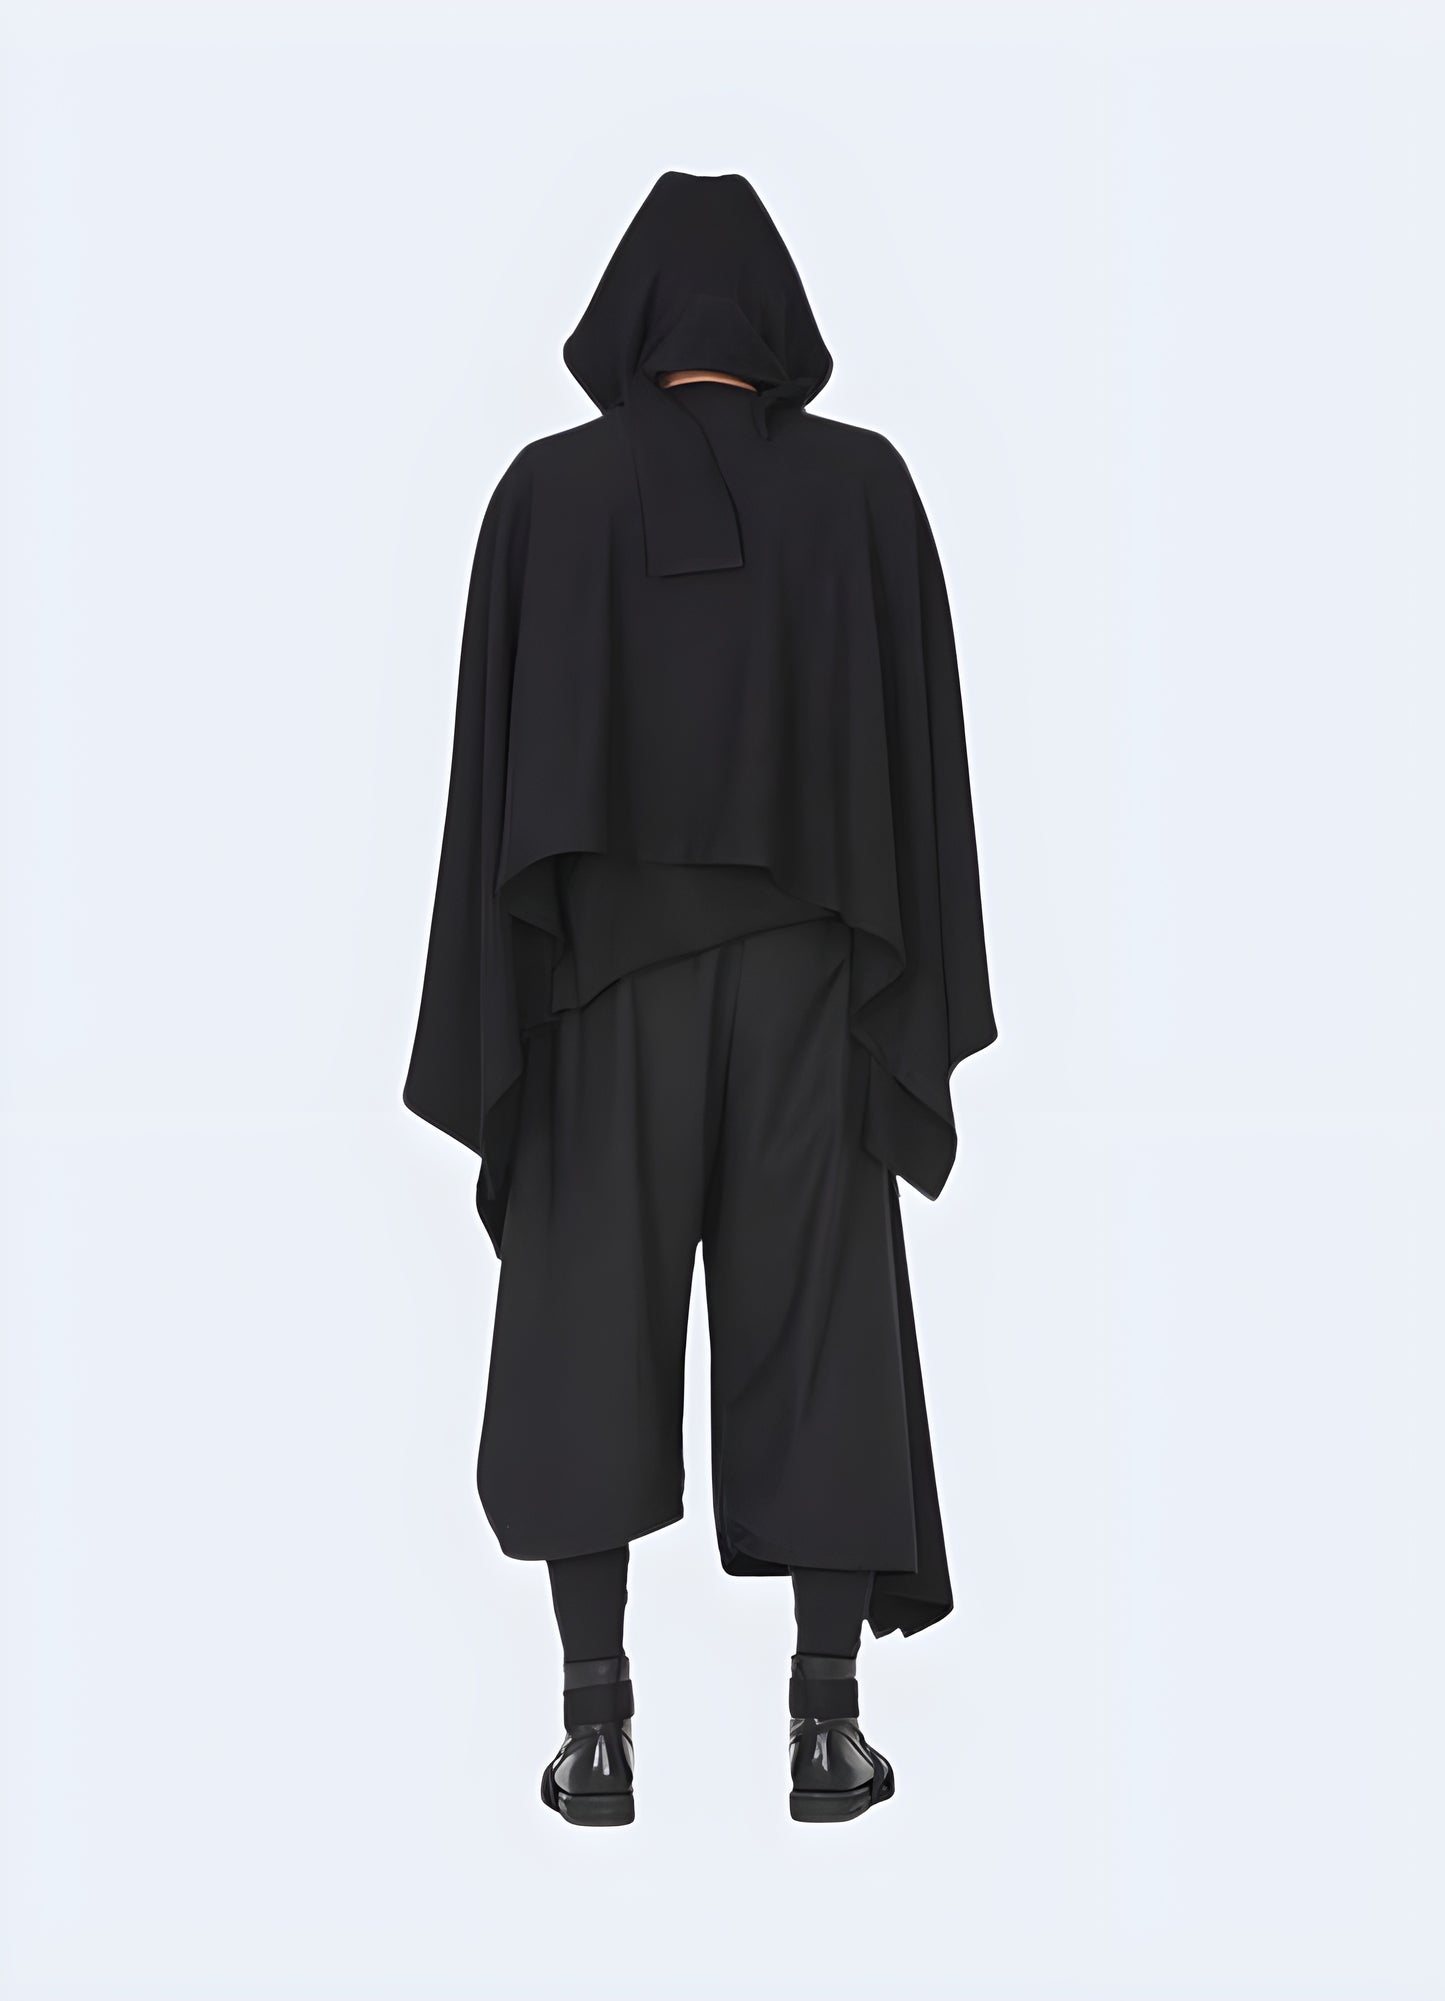 Zip front with snap placket over flap cloak coat with hood.